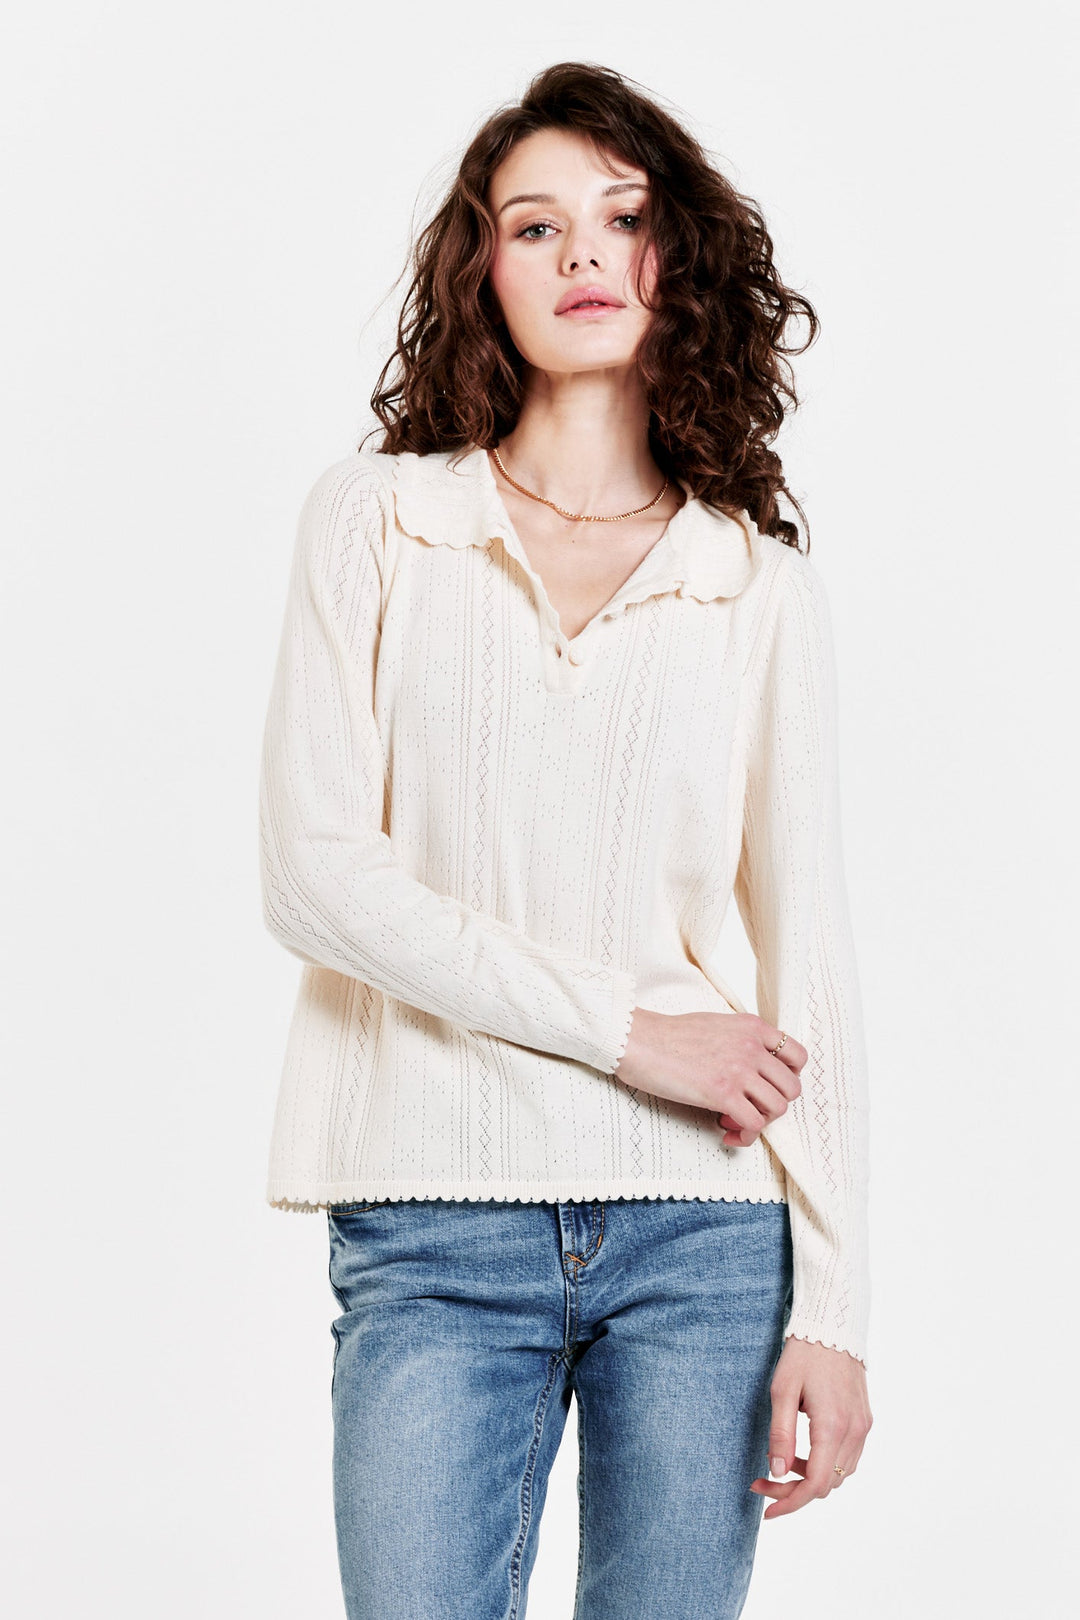 image of a female model wearing a ELIZABETH BUTTON FRONT HENLEY CREAM TOPS